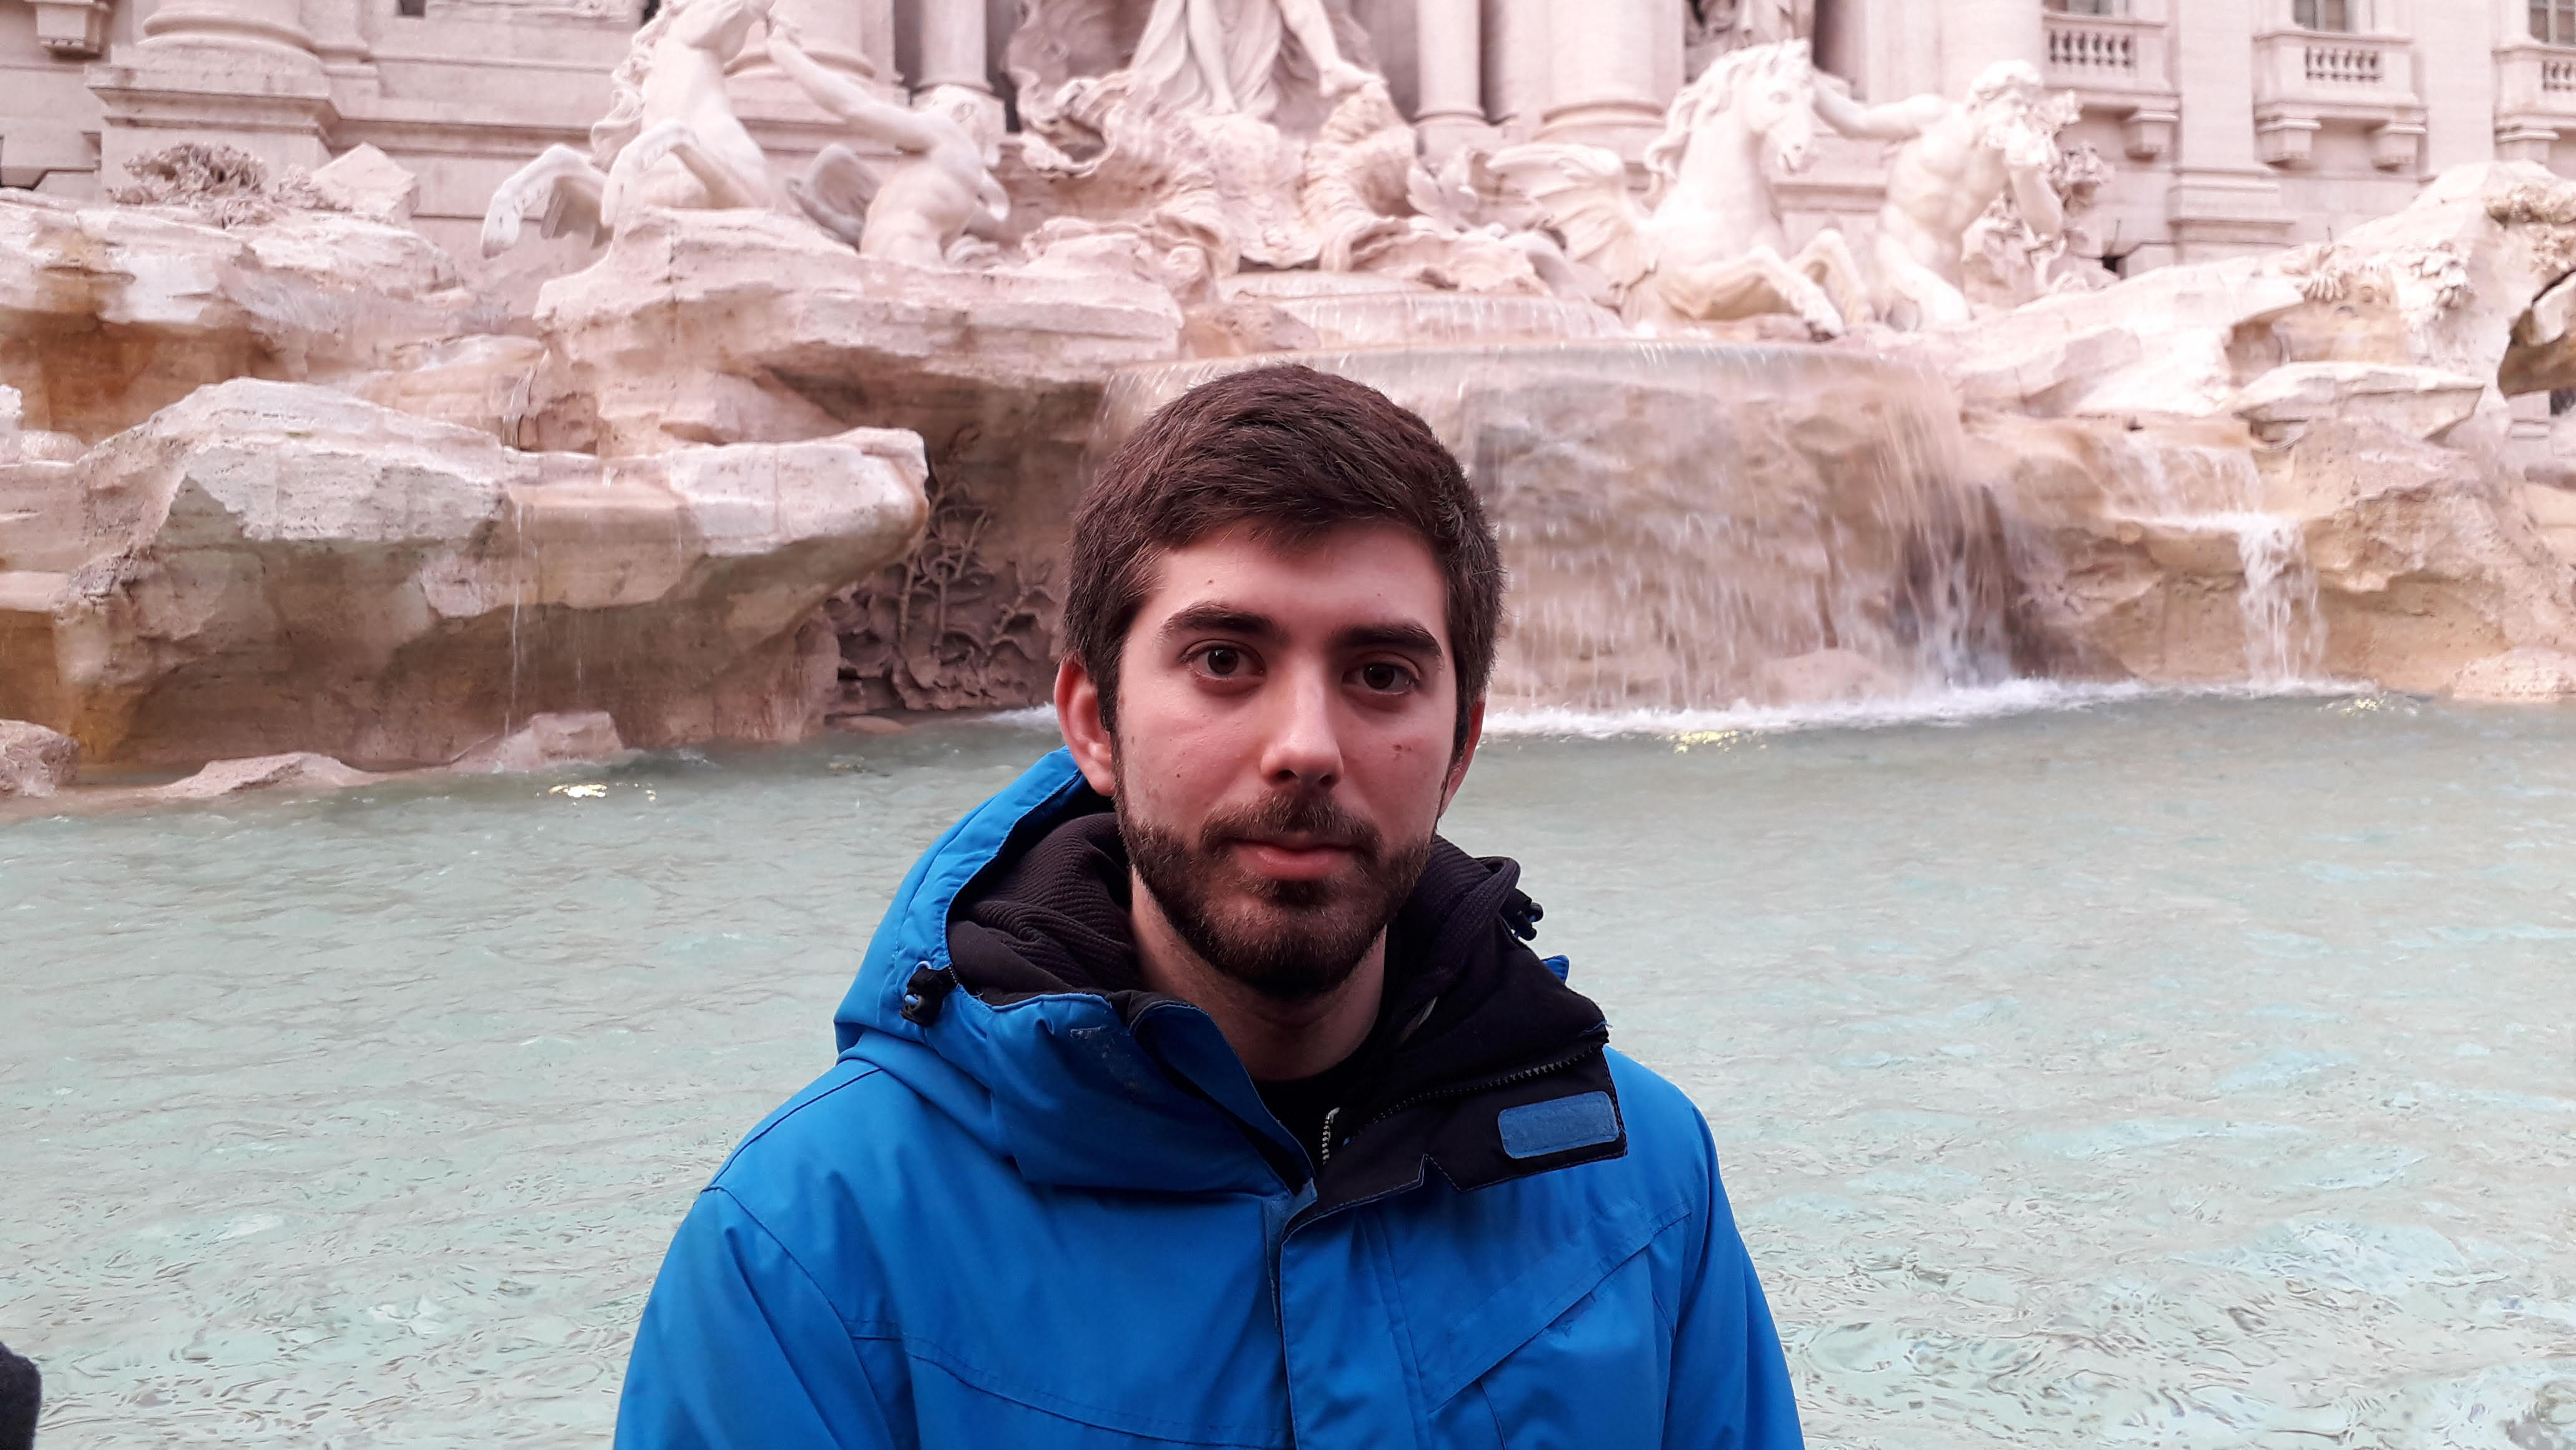  Sergi Marín tells us about his internship experience in Italy